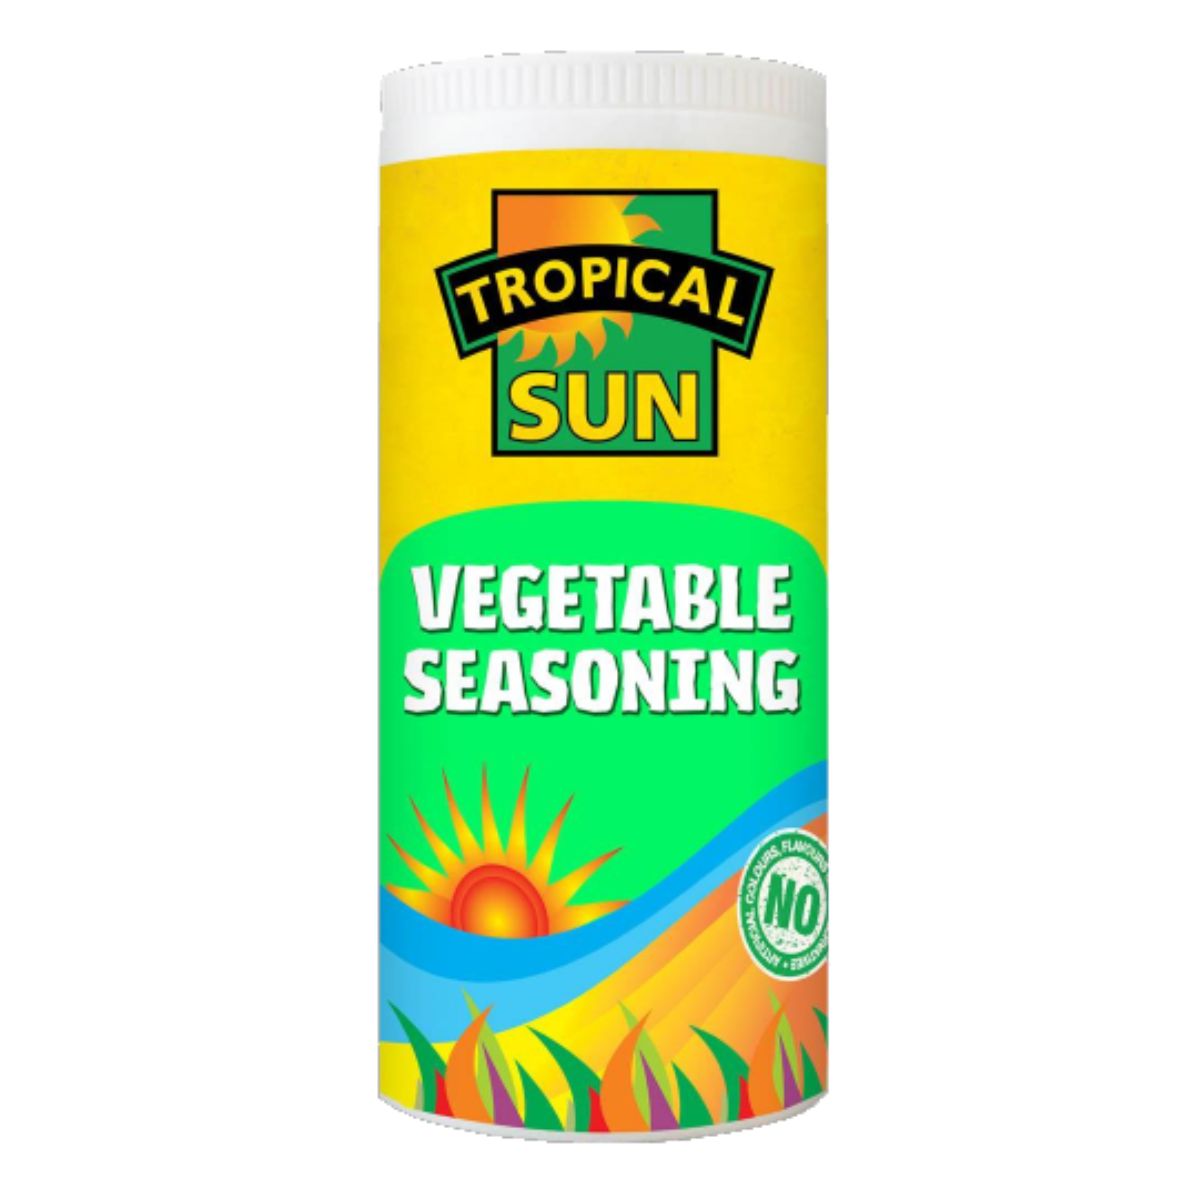 Container of Tropical Sun - Vegetable Seasoning - 100g.